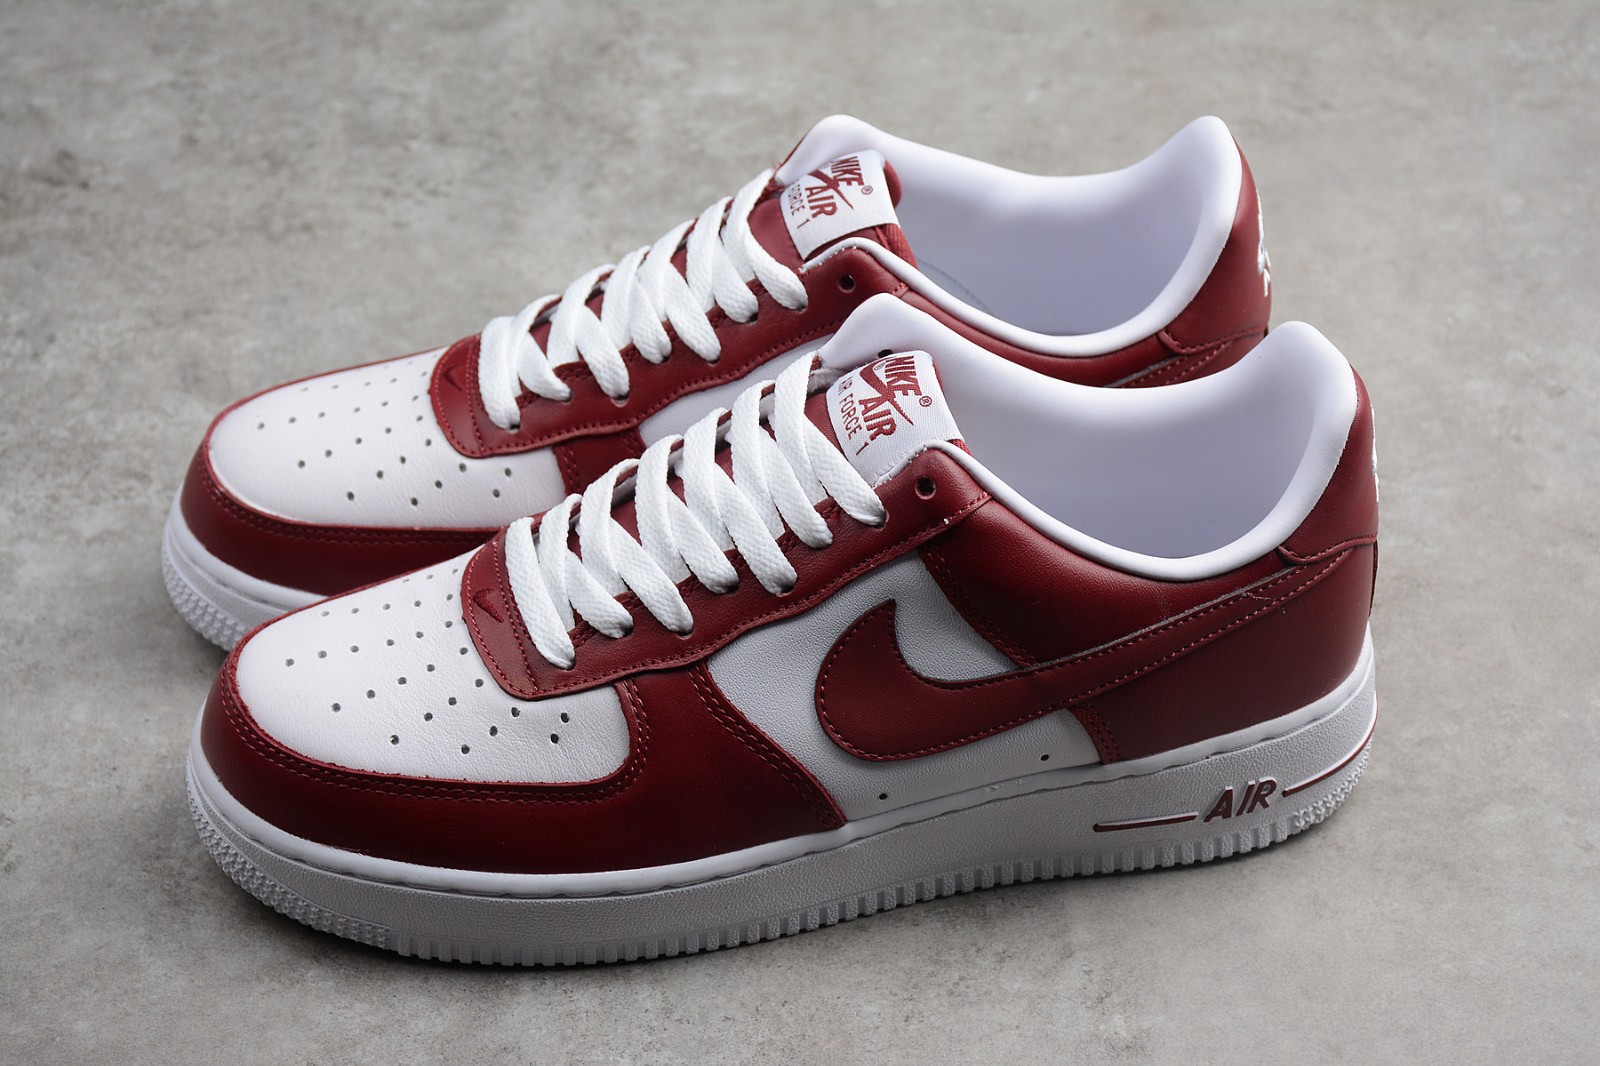 Nike Air Force 1 Low Team Red White AQ4134 600 - Sepsale